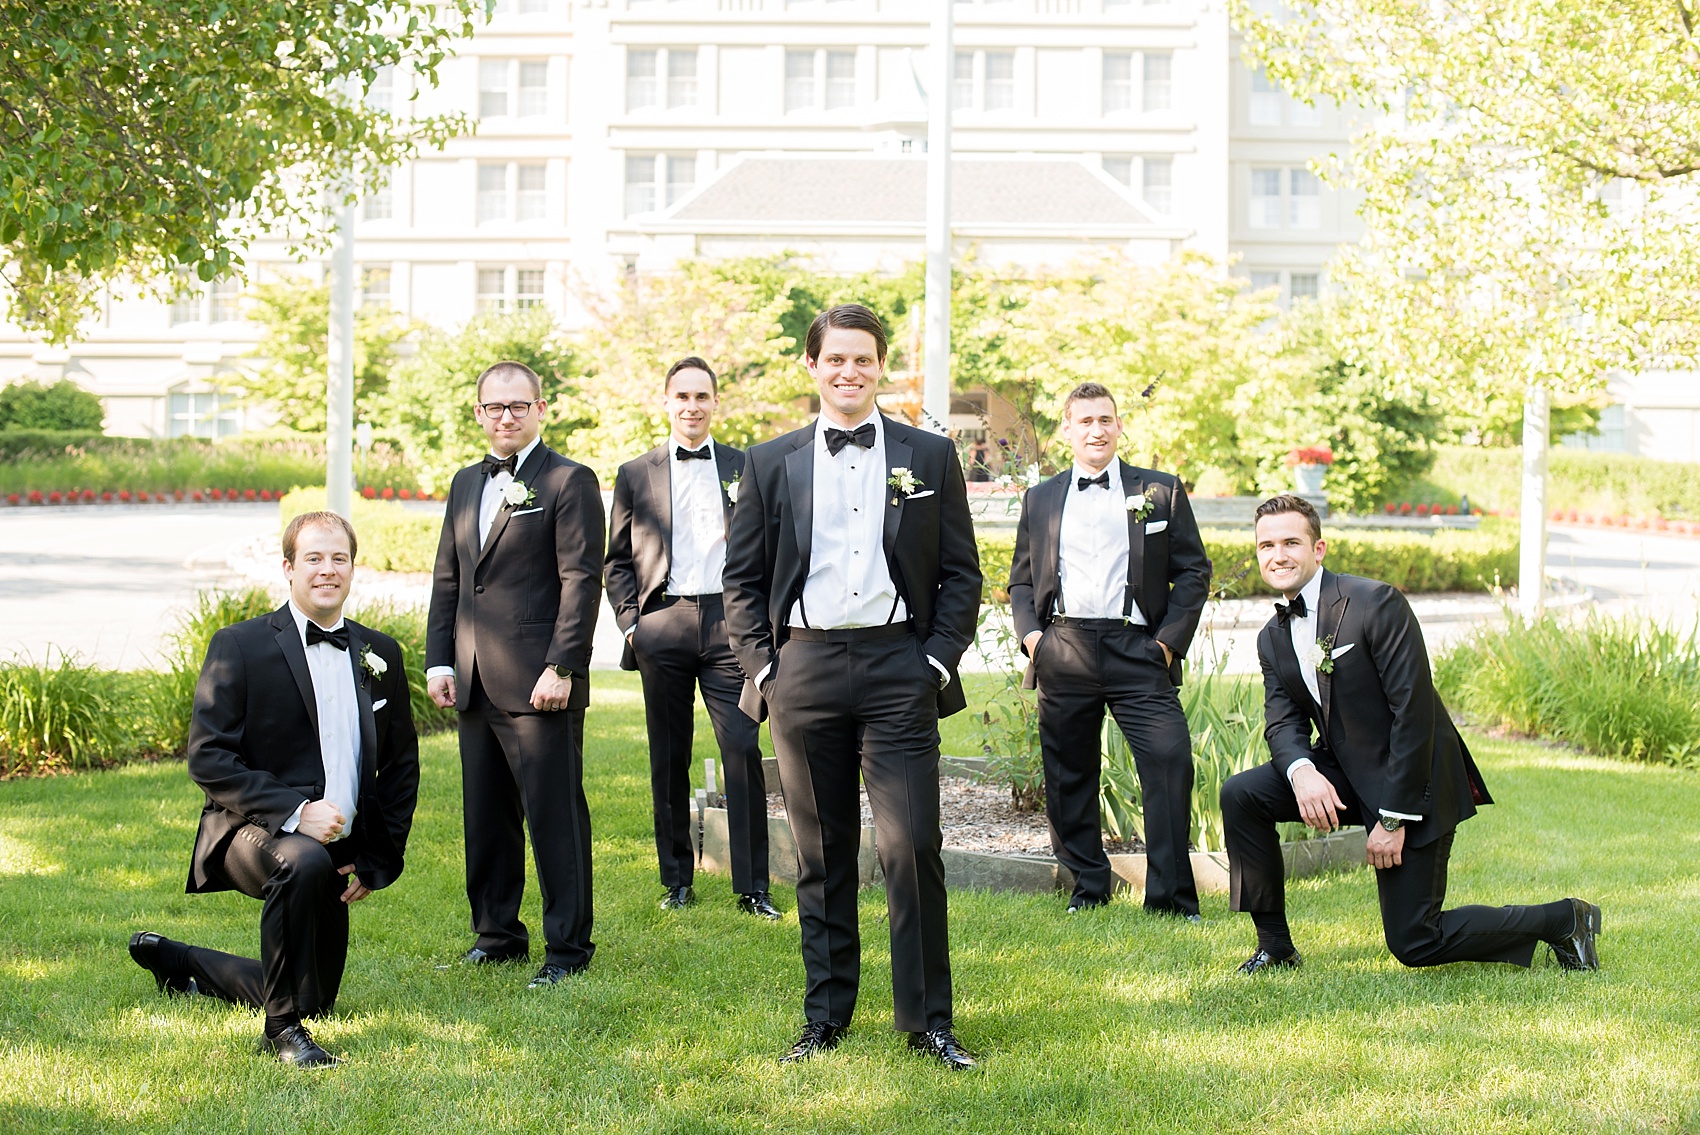 Pearl River Hilton groomsmen wedding photos. Images by Mikkel Paige Photography, NYC wedding photographer.